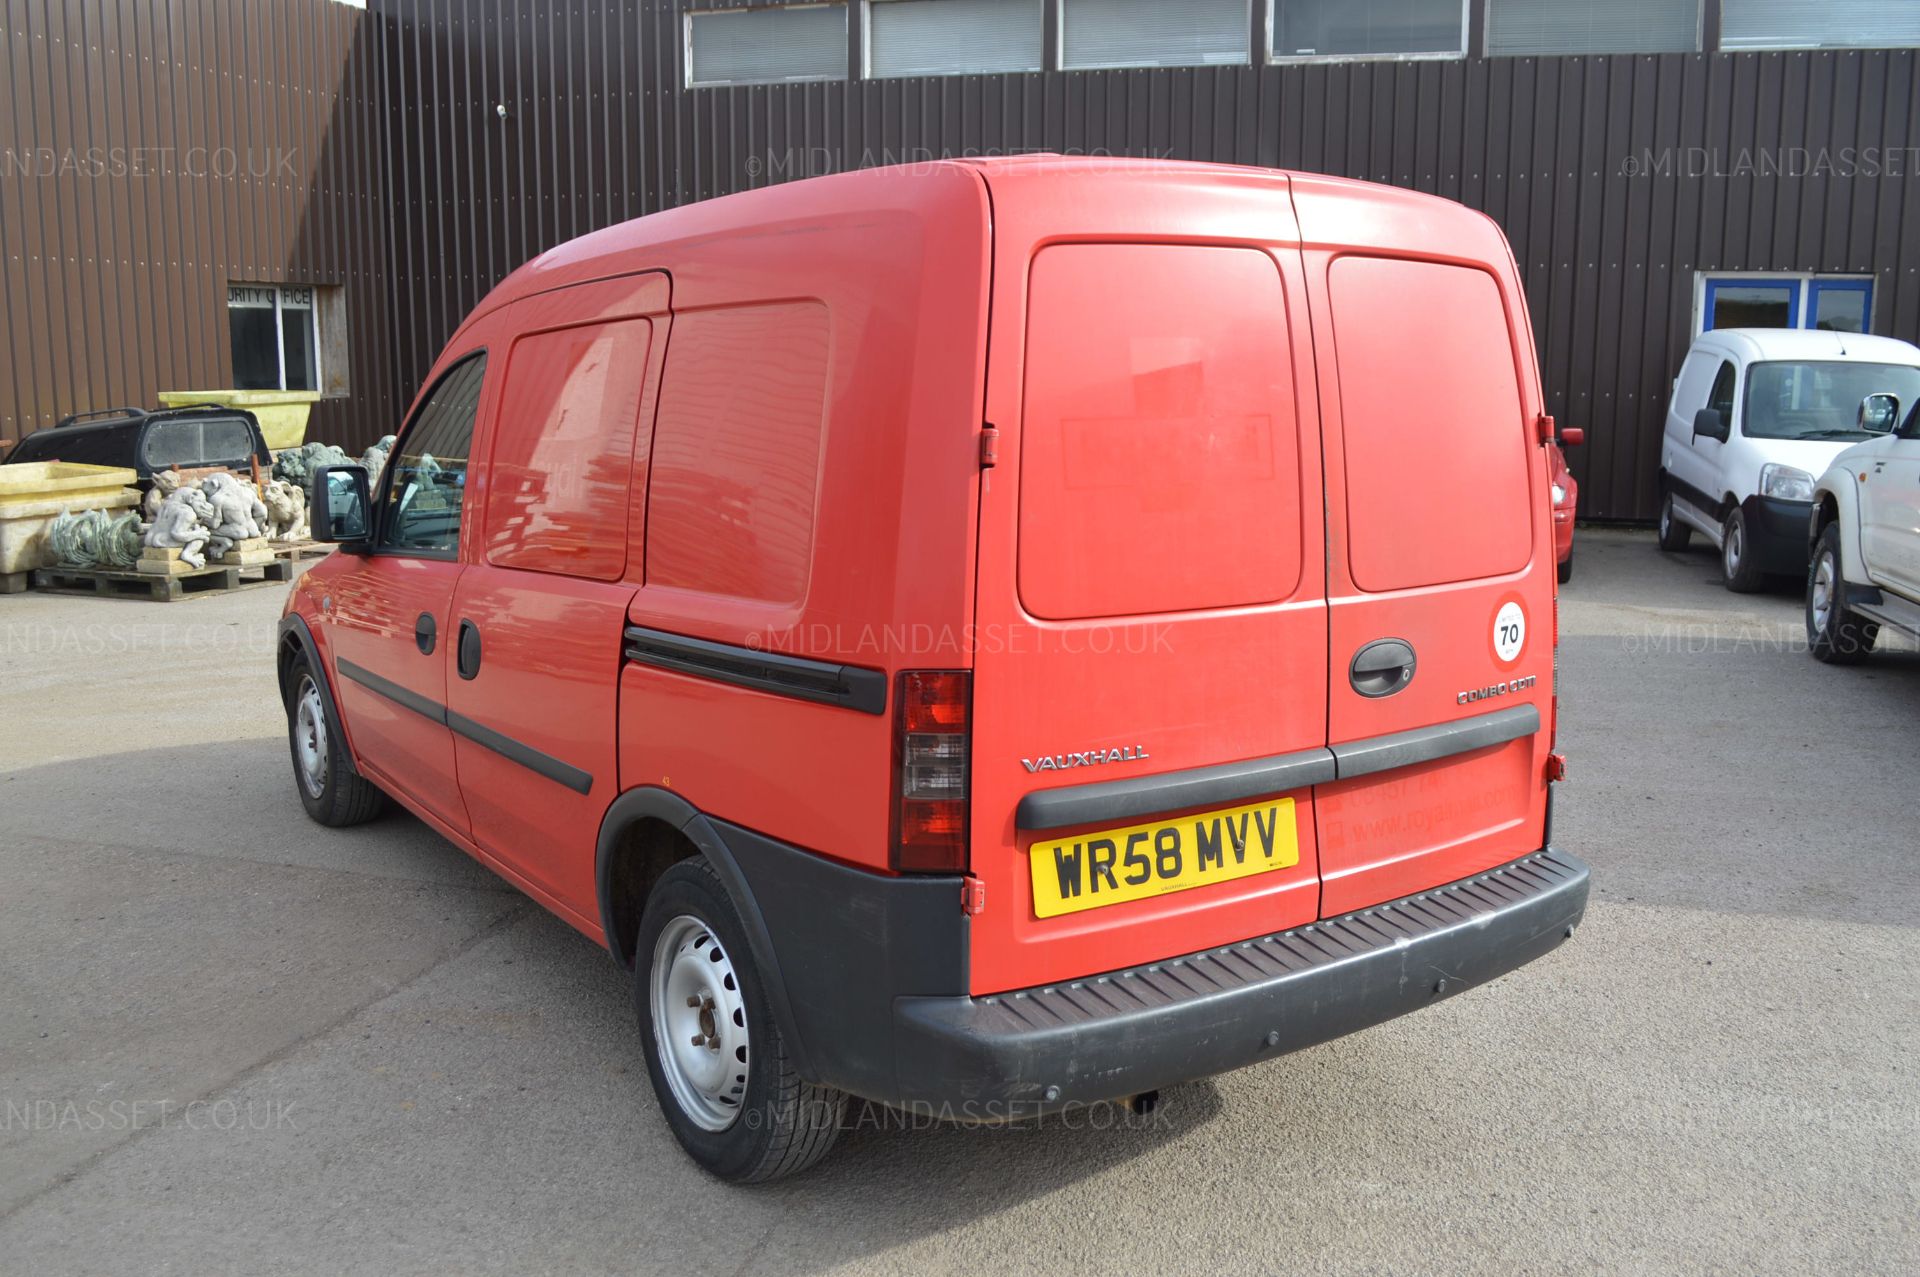 KB - 2008/58 REG VAUXHALL COMBO 1700 CDTI - 1 PREVIOUS OWNER, ROYAL MAIL *NO VAT*   DATE OF - Image 4 of 19